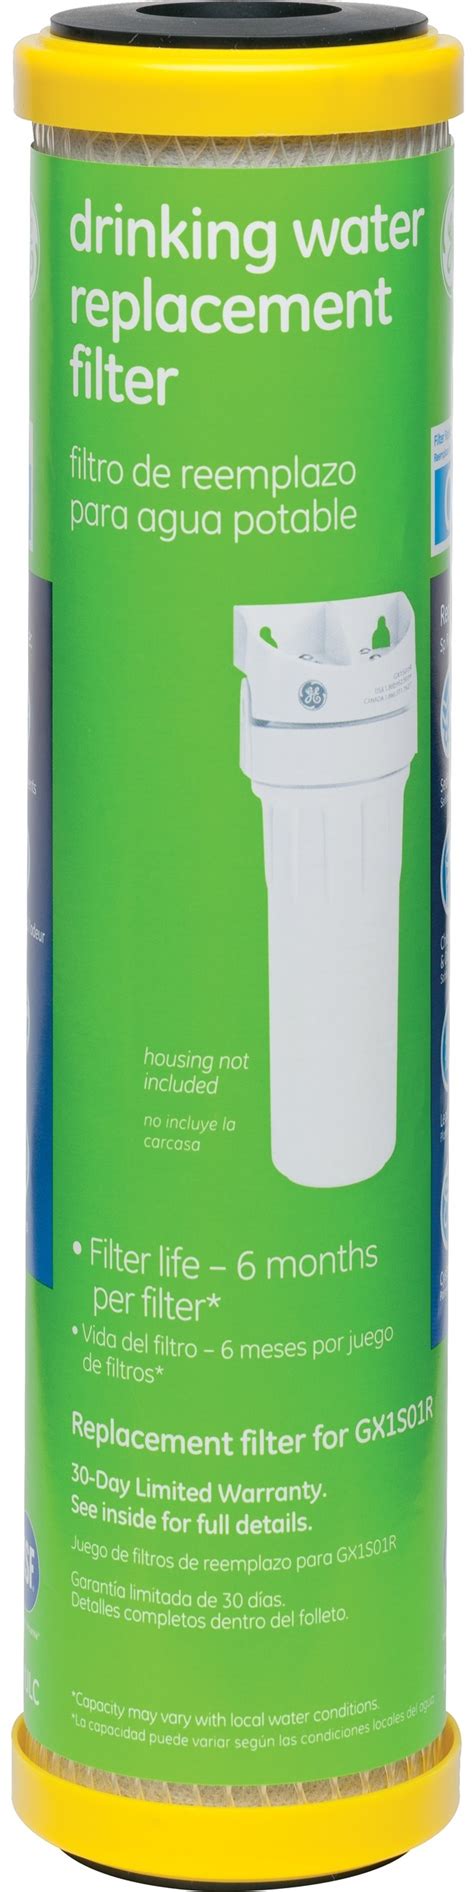 Fxulc Ge Smartwater Single Stage Filter Cartridge